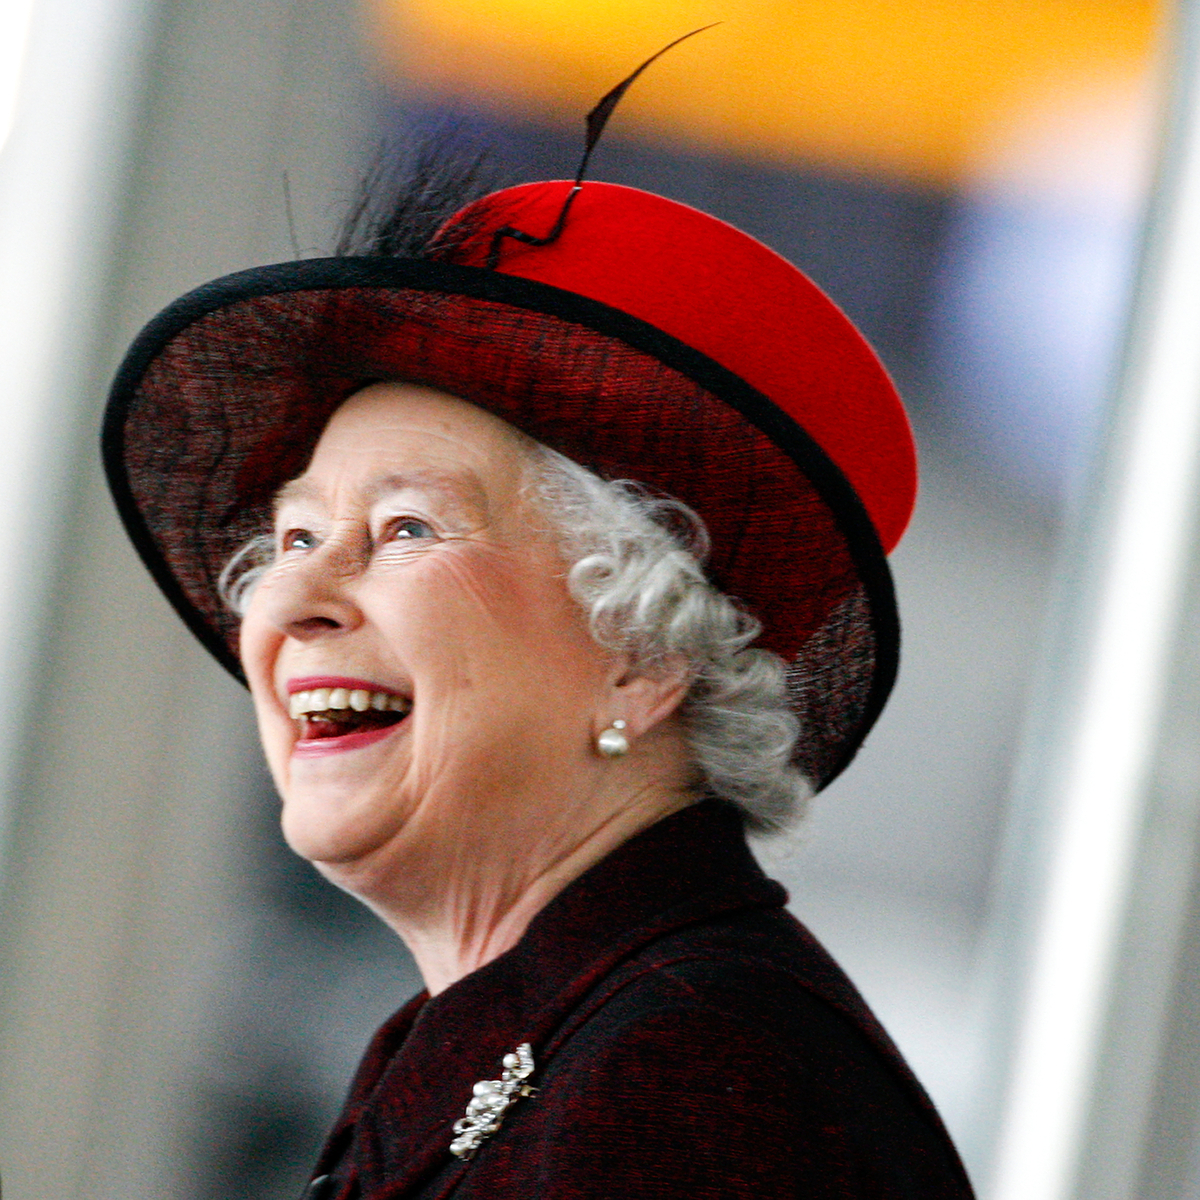 Tributes paid to Queen Elizabeth II, who has died aged 96